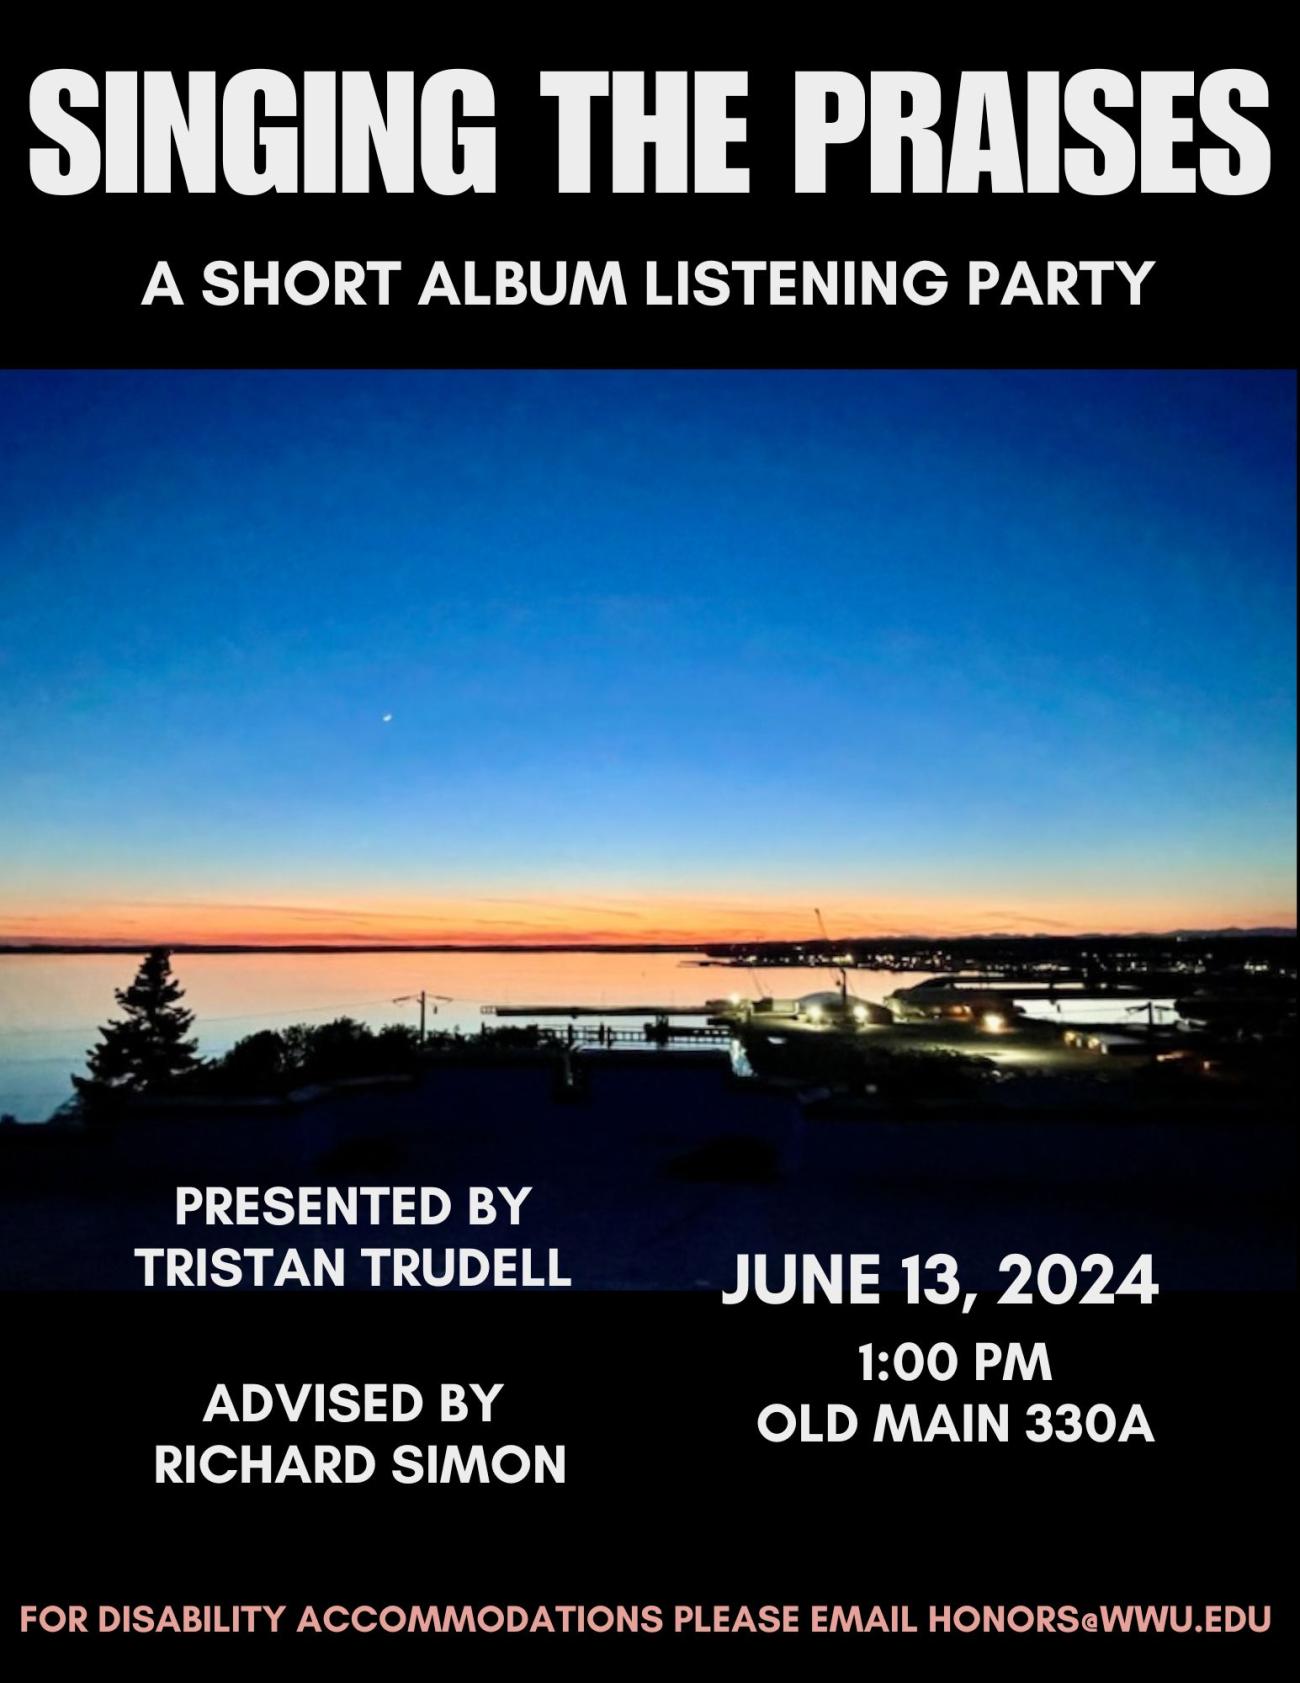 Alt text: A blue and orange image featuring a nighttime view of the downtown Bellingham skyline. The text reads "Singing The Praises: A Short Album Listening Party. Presented by Tristan Trudell. Advised by Richard Simon. June 13, 2024. 1:00 PM. OM 330A. For disability accommodations, please email honors@wwu.edu"